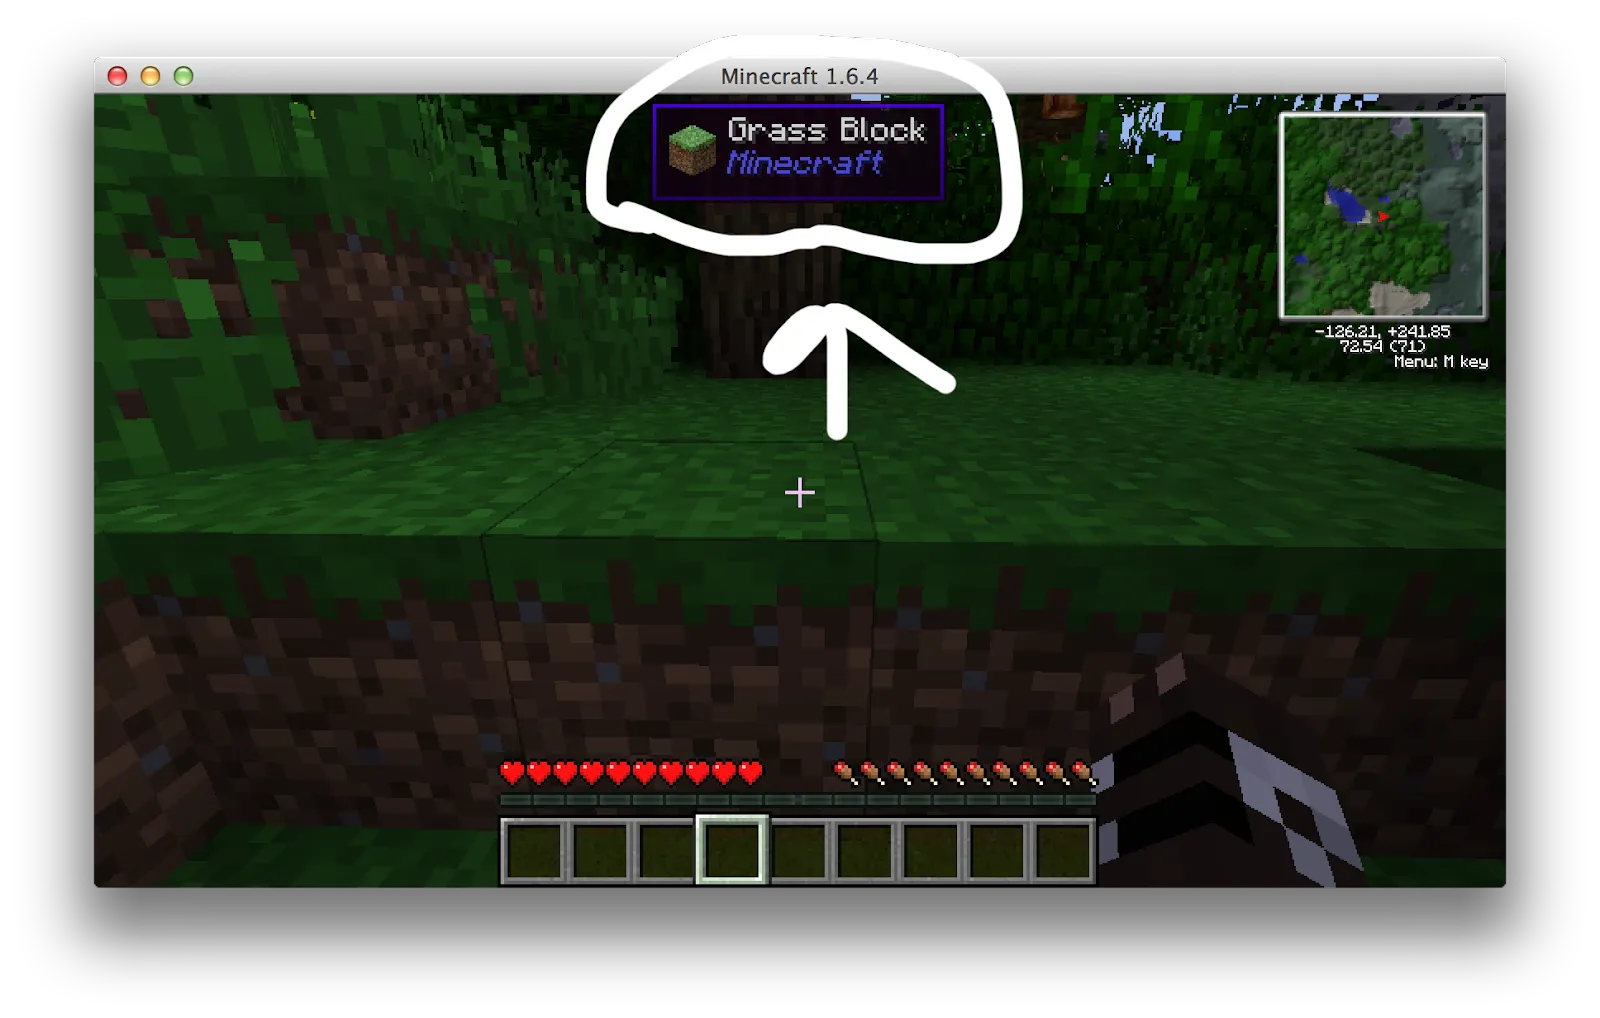 Image showing the health, food and inventory bars in-game in Minecraft